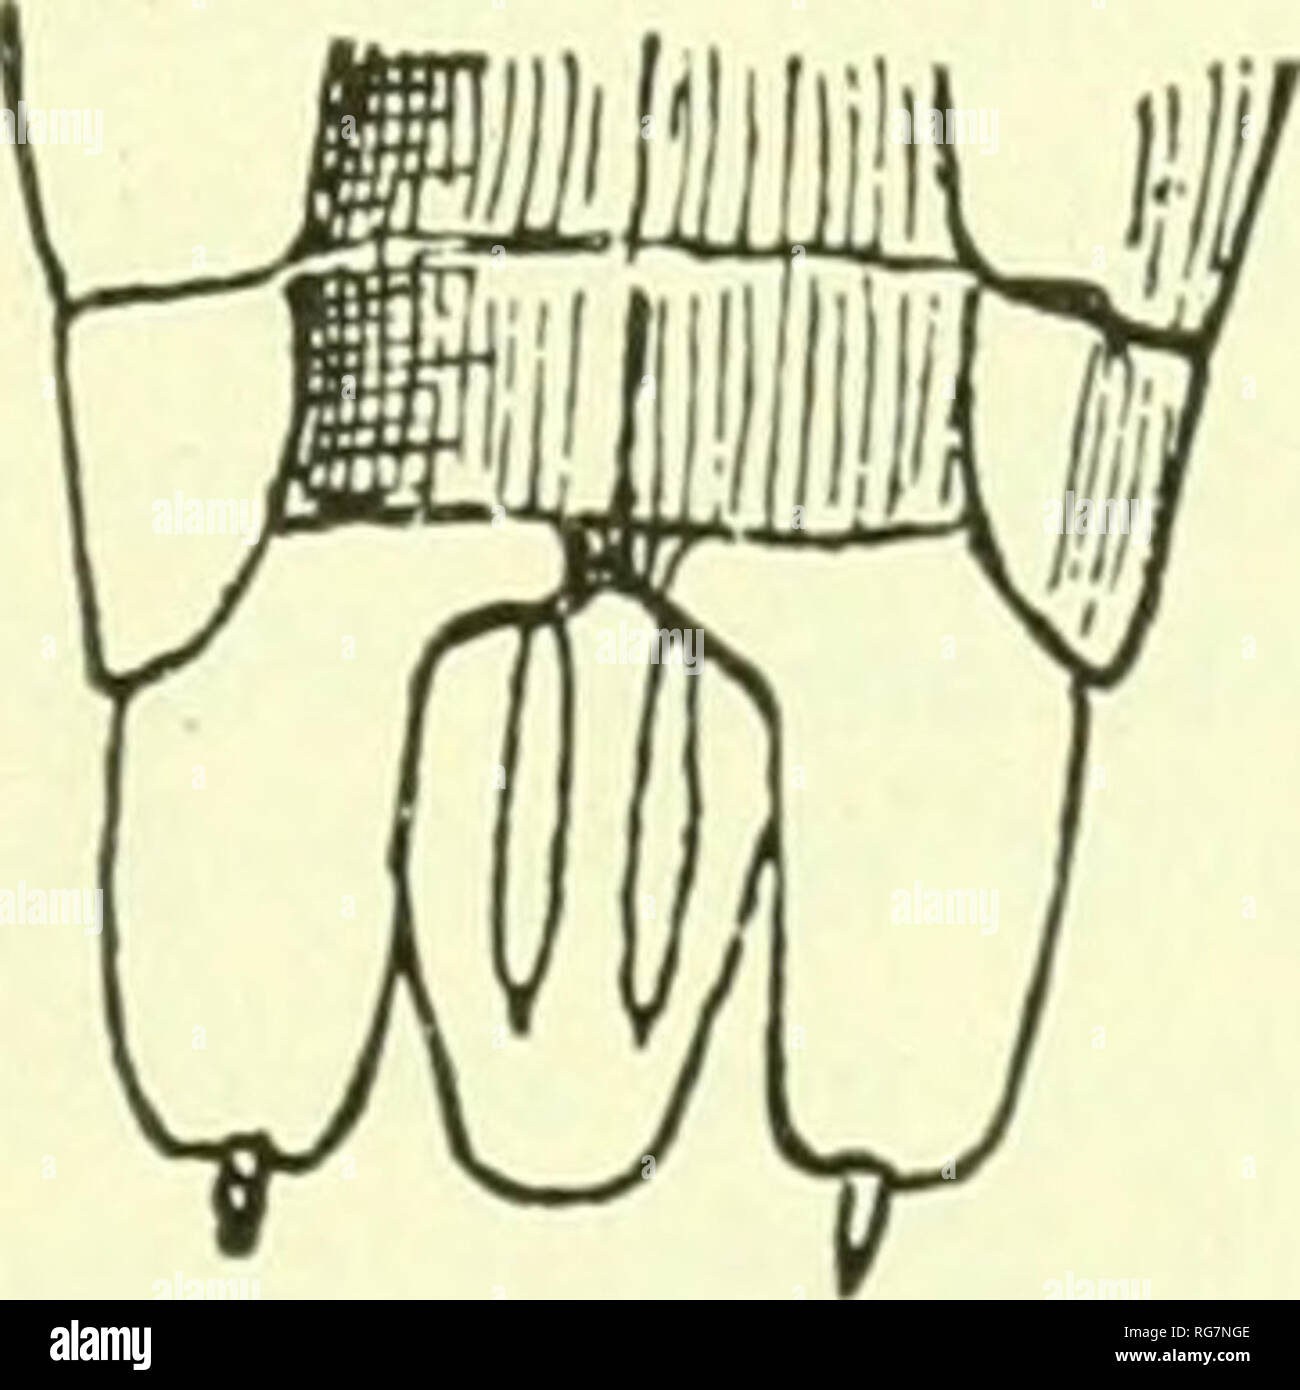 . Bulletin - United States National Museum. Science. Fig. 651.—Ethelum reflexum (After Dollfus). a, Head and first two segments of thorax (UPPER SIDE). 6, The same (underside), c, Fifth and sixth segments of abdomen and uro- PODA (upper side), cl, THE SAME (UNDERSIDE). Coxopodite of the second segment hidden under the bent side part of the segment. Pleon, telson: the lateral parts being nearly folded underneath, the hind edge of segments (3-5) seems straight from a dorsal view. Pleotelson flat, with curved sides and a blunt, rather rounded apex. Uropoda: basis with a large oblong processus; en Stock Photo